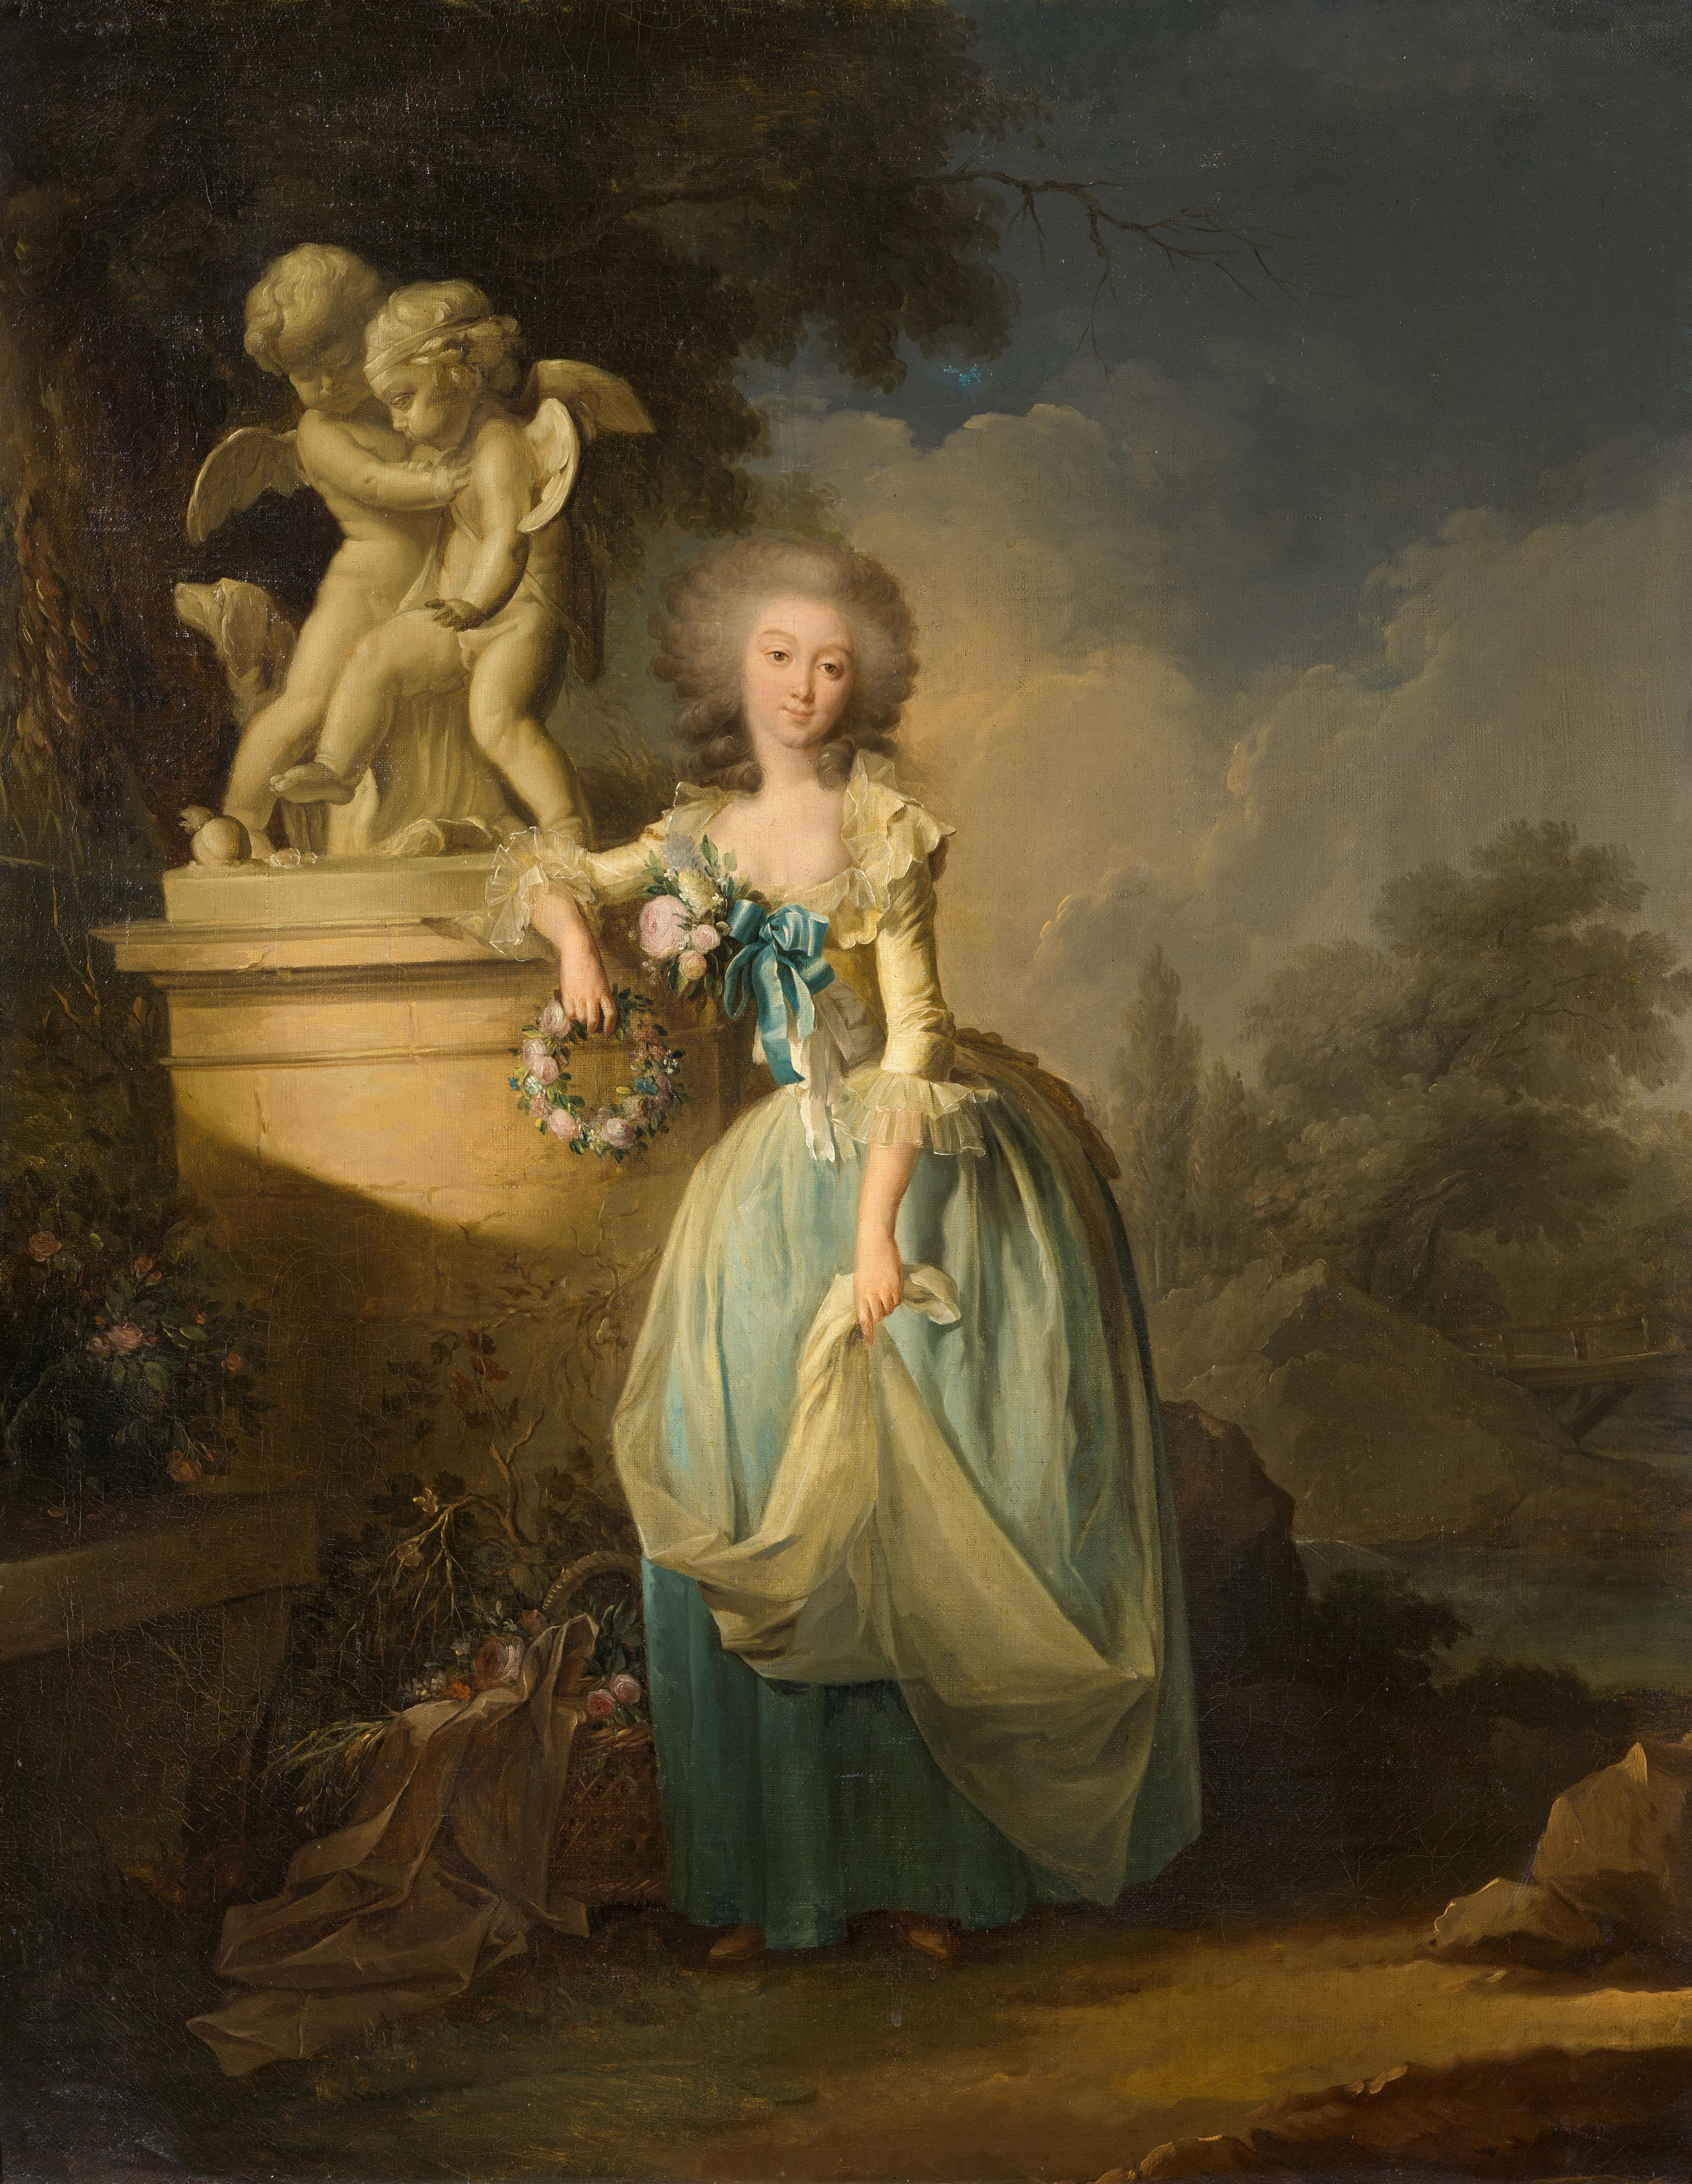 French School 18th century - Portrait of a Gentleman hunting
Portrait of a Lady in a Park in front of a Marble Sculpture - image-1